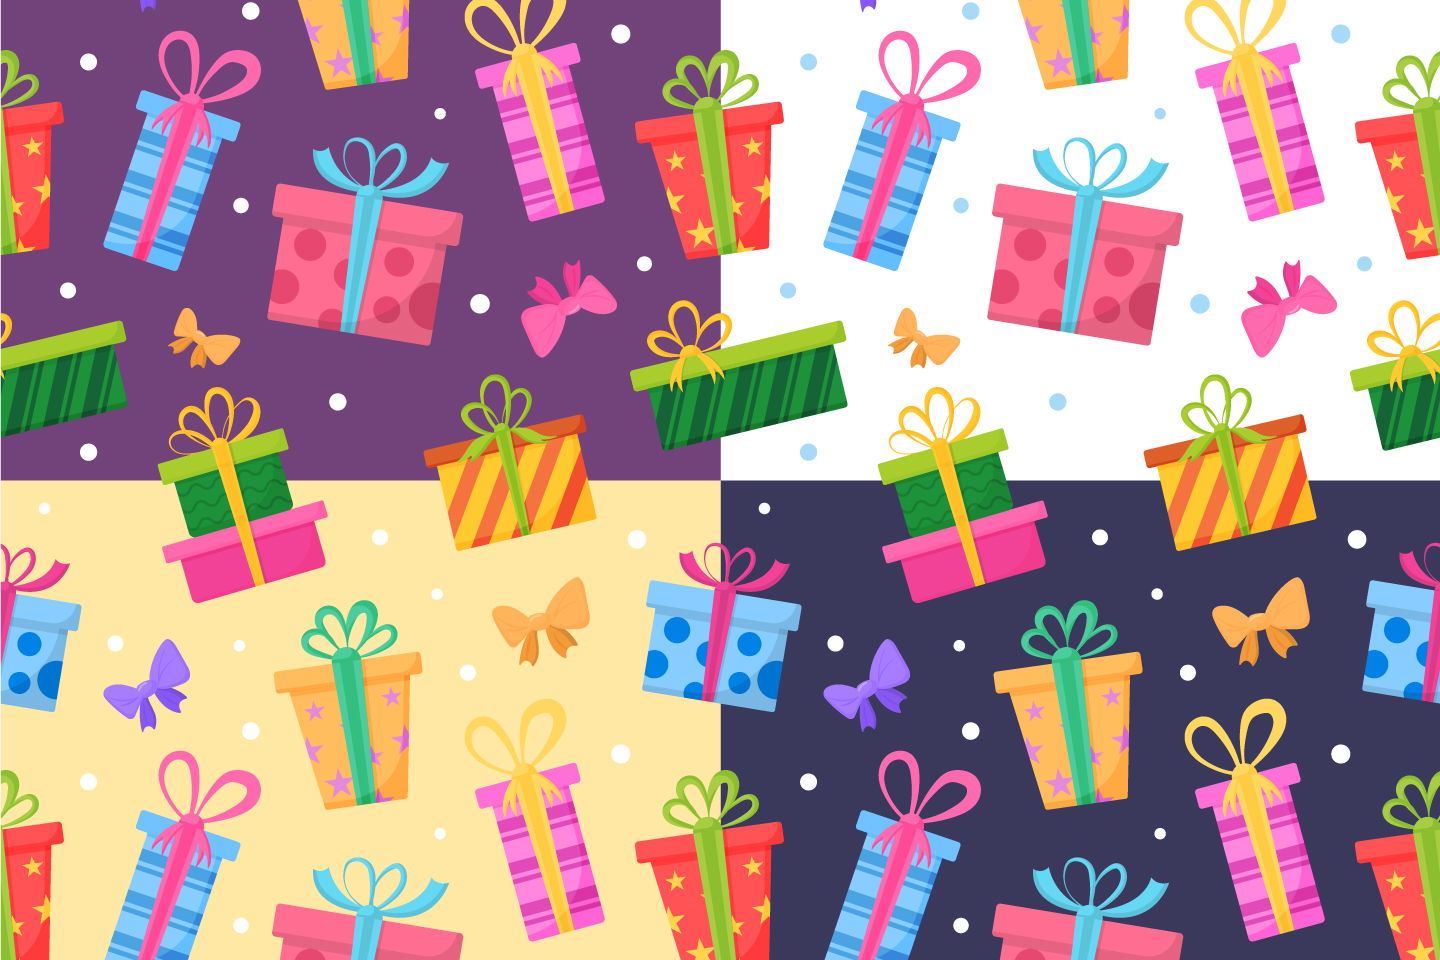 Gift Boxes Free Vector Seamless Pattern - GraphicSurf.com